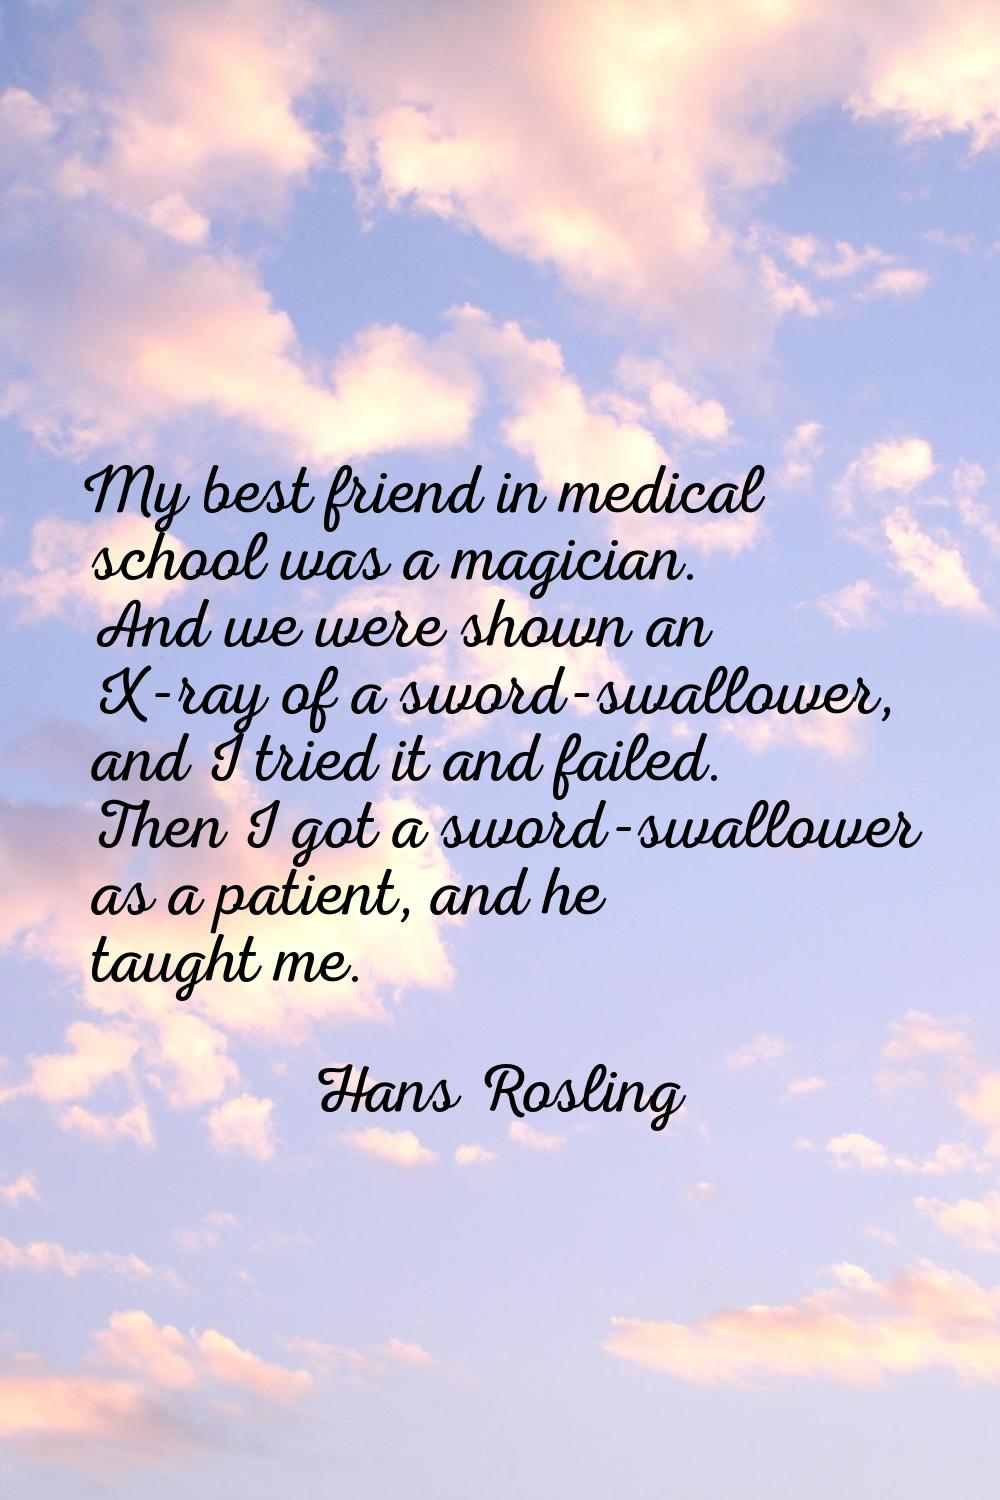 My best friend in medical school was a magician. And we were shown an X-ray of a sword-swallower, a